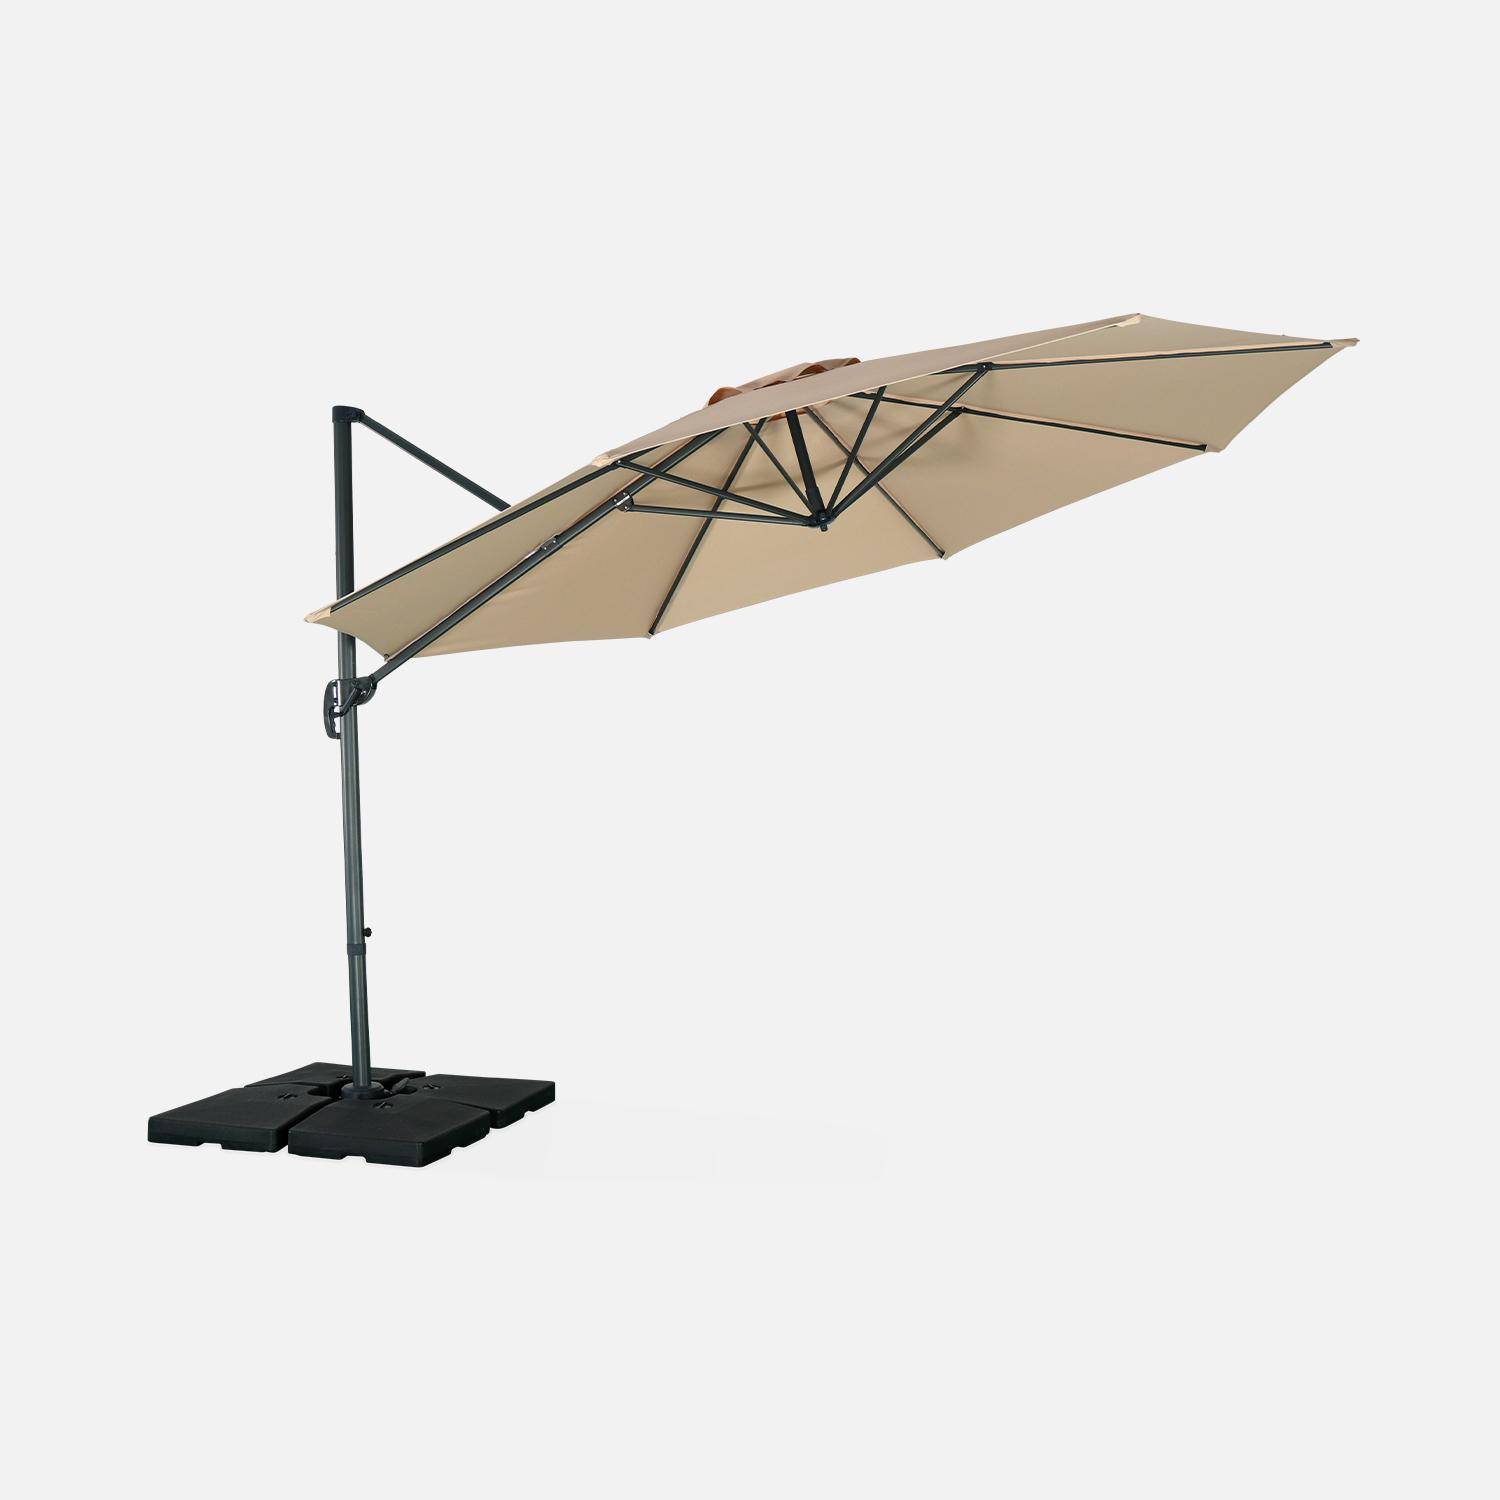 Parasol Ø350cm - parasol that can be tilted, folded and 360° rotation - Antibes - Beige,sweeek,Photo7